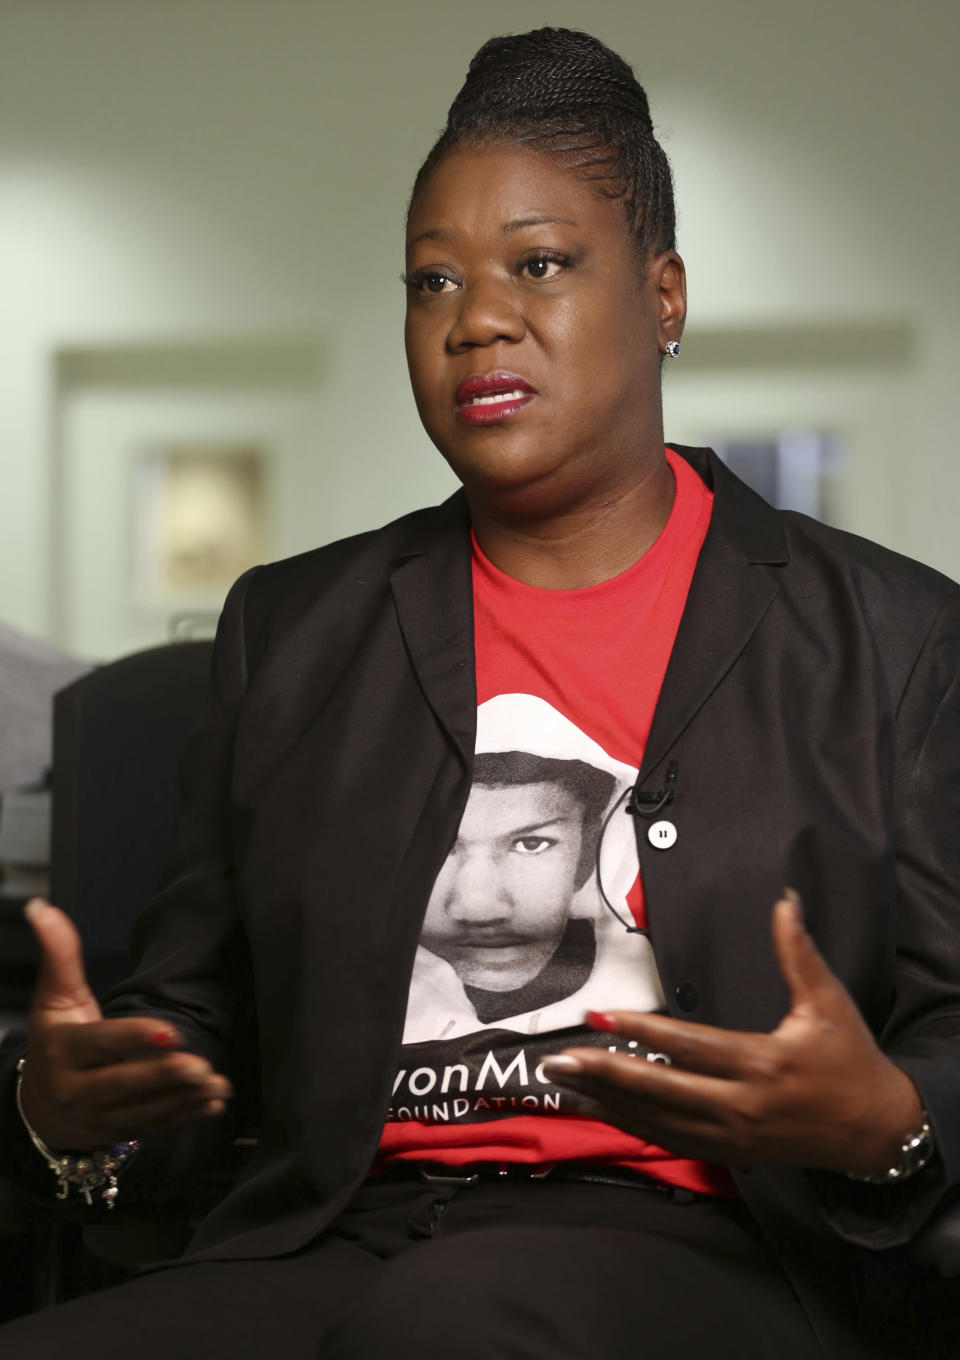 <p> FILE- This Feb. 25, 2015 file photo shows Sybrina Fulton, mother of Trayvon Martin, in Miami. Fulton is against a line of insurance offered by the NRA for gun owners to cover not only civil liability but costs associated with any criminal charges whenever a gun owner uses their firearm in what they call a self-defense or stand your ground case. (AP Photo/Marta Lavandier, File) </p>